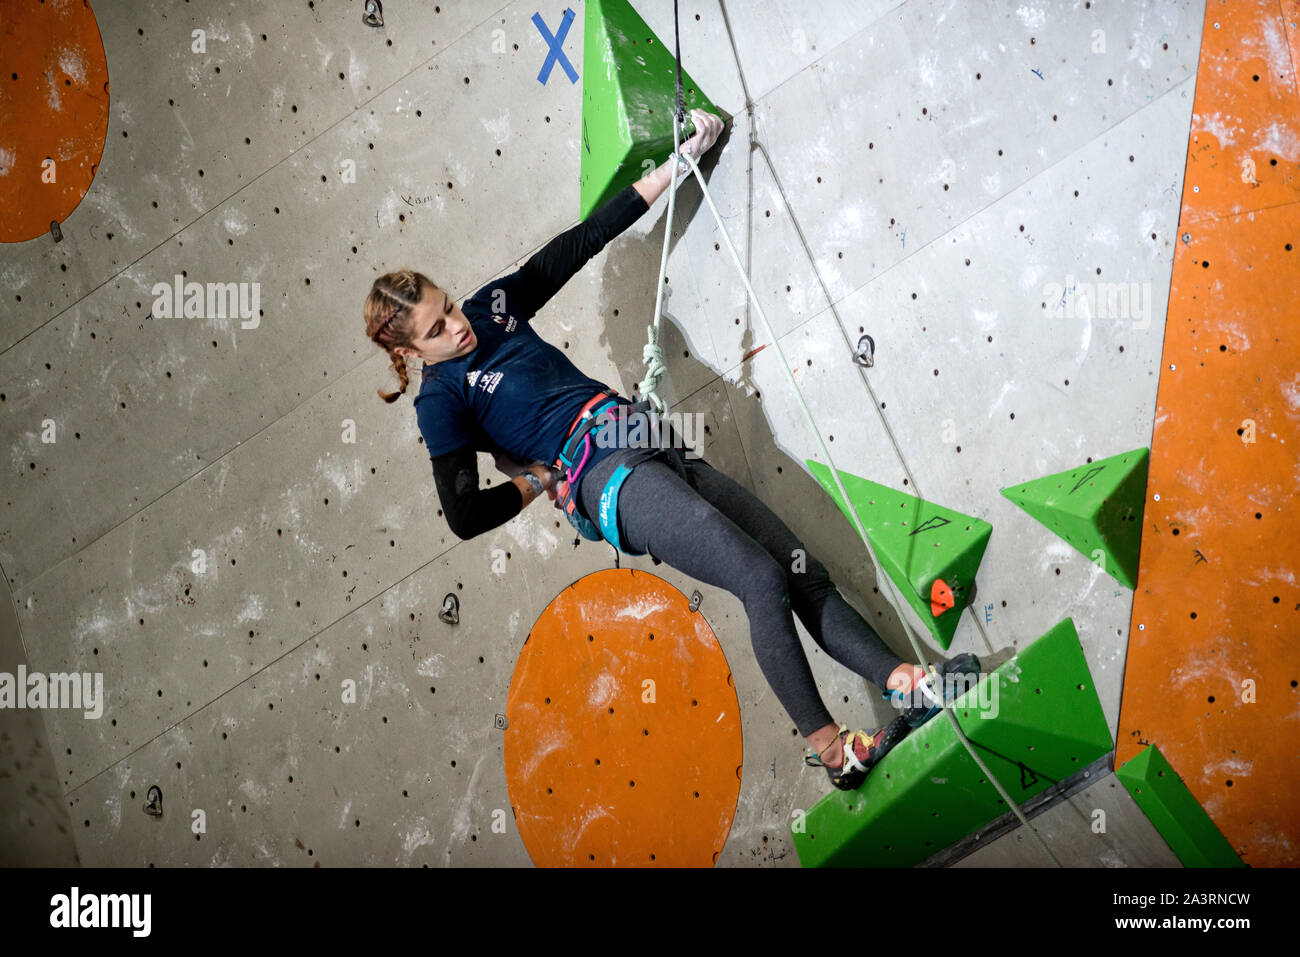 Luce Douady of France competes in the Lead climbing womans Final on at the IFSC Climbing World Championships at the Edinburgh International Climbing A Stock Photo